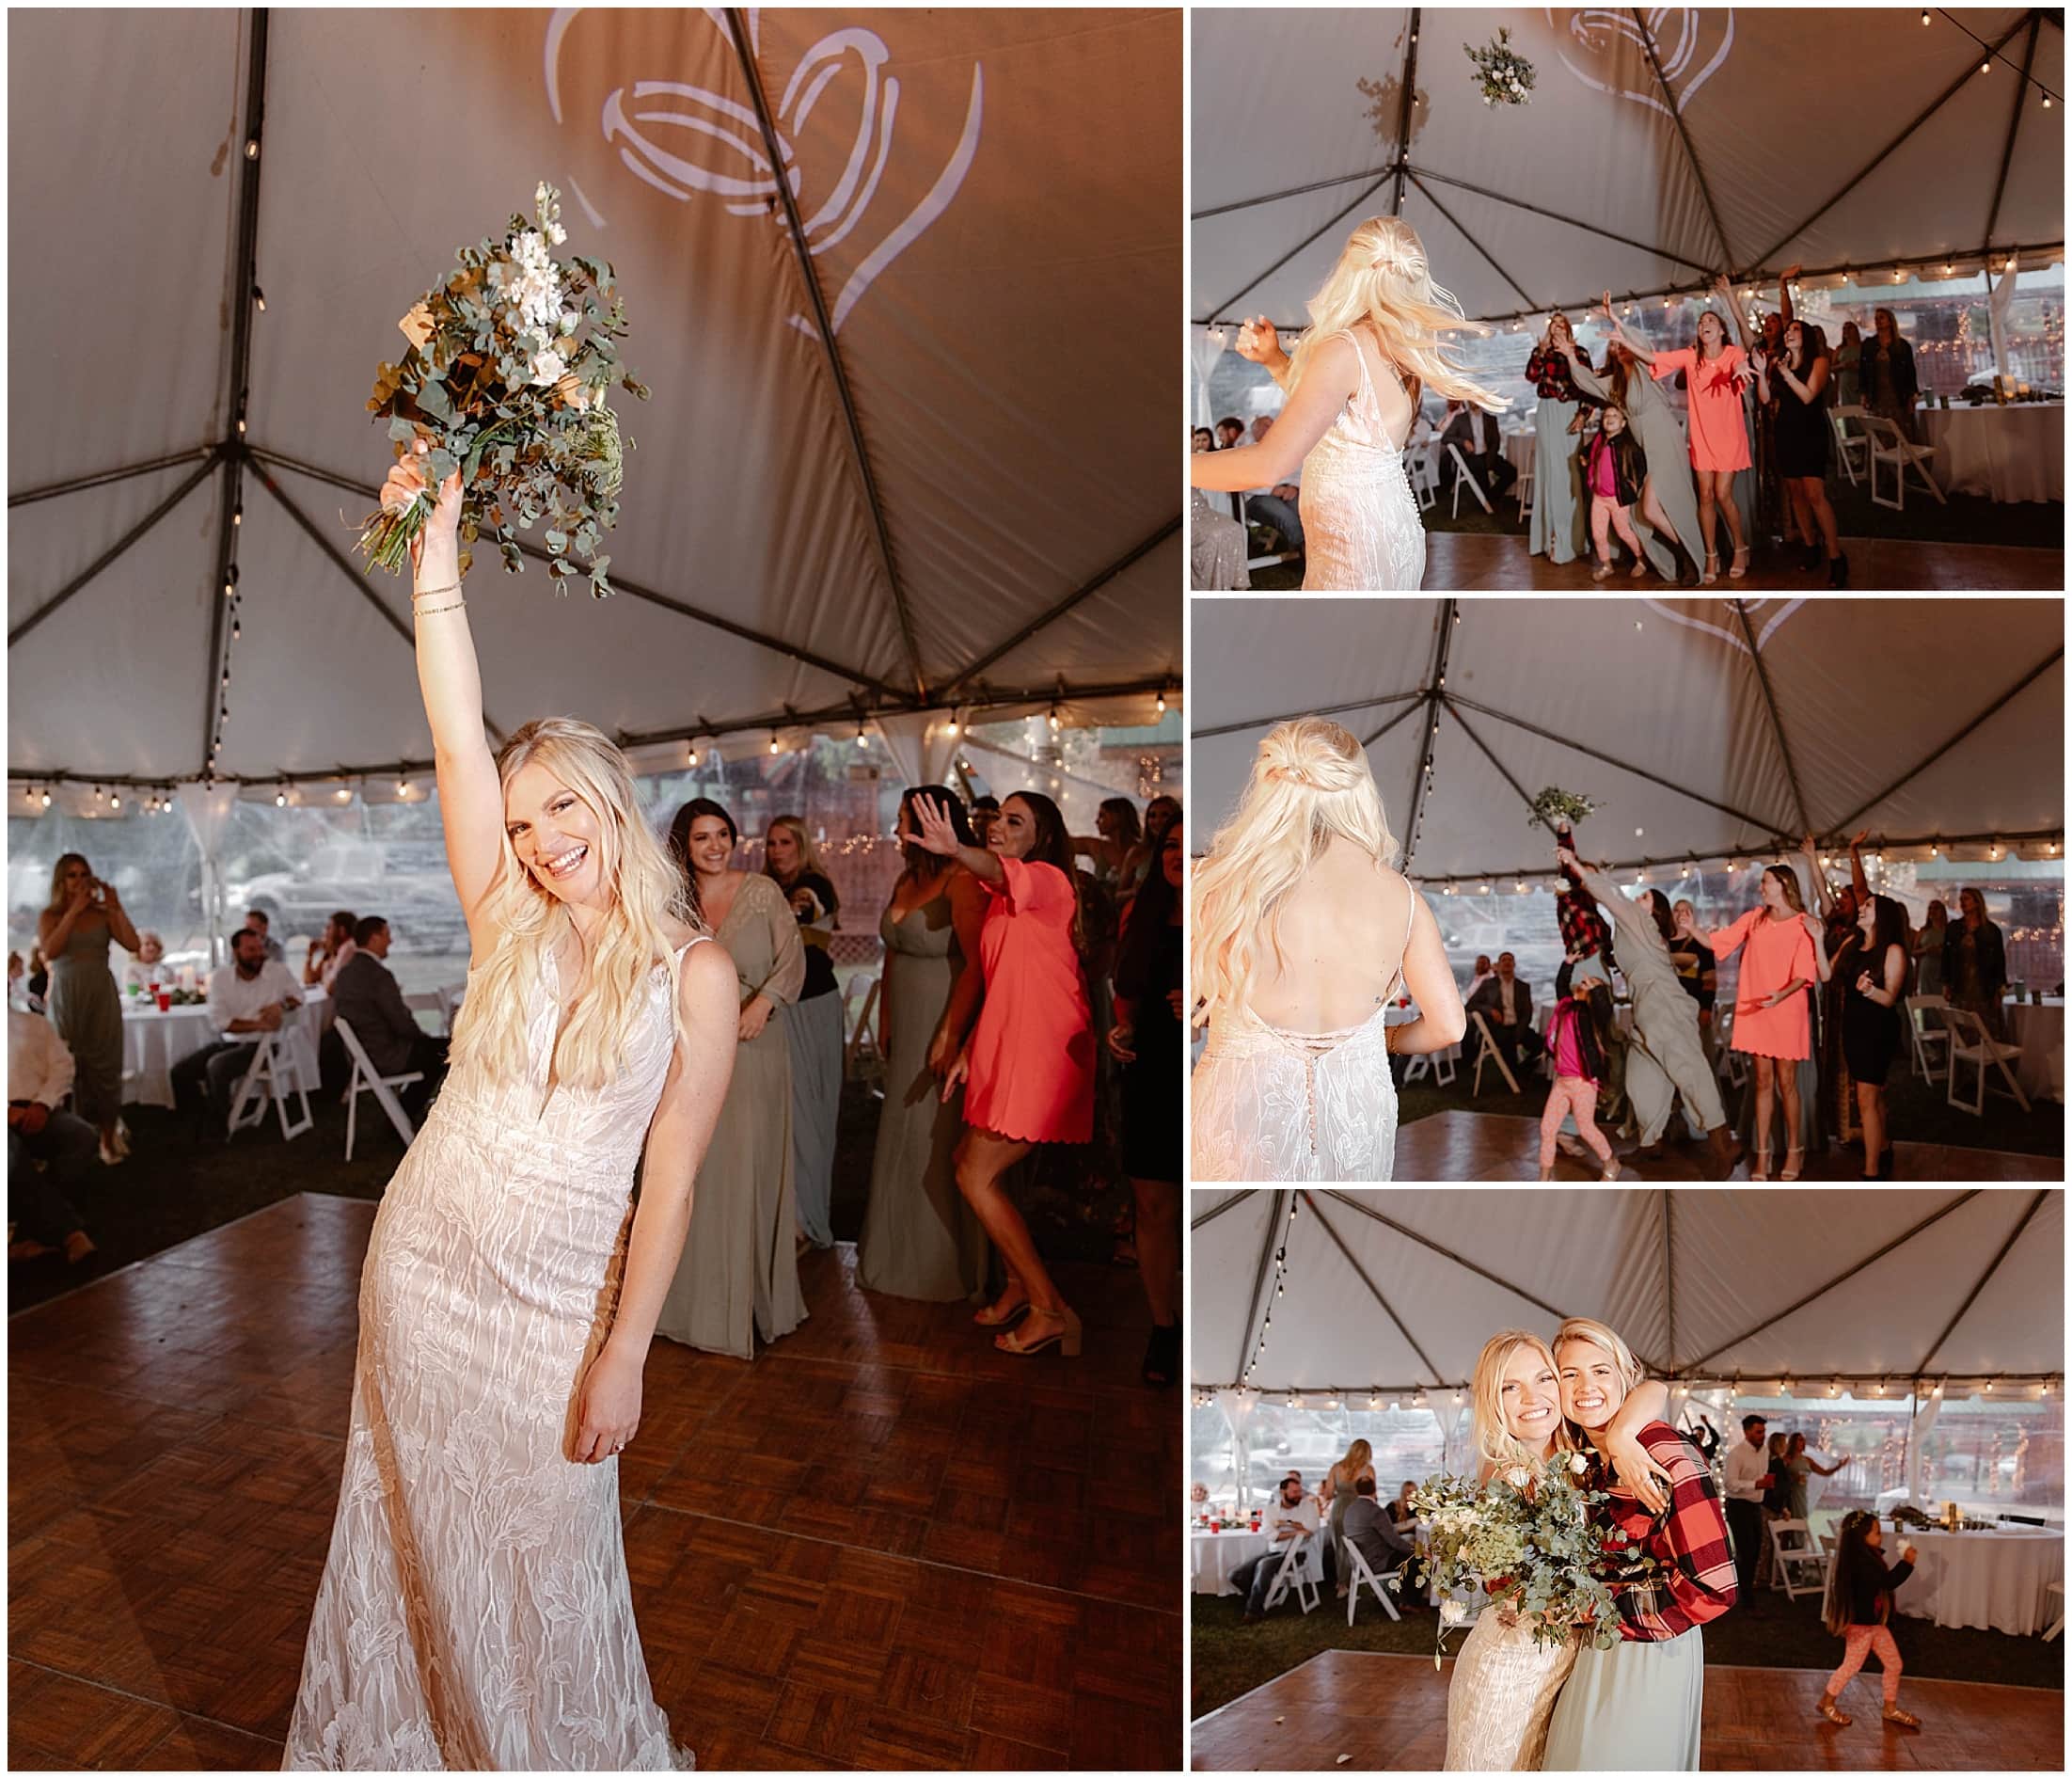 bouquet toss at wedding, Aspen Lodge, Red River New Mexico, Red River New Mexico Wedding, Weddings in New Mexico, Destination mountain wedding, destination mountain elopement, elopements in new mexico, places to get married in new mexico, destination elopement photographer, mountain wedding photographer, new mexico wedding photographer, new mexico elopement photographer, brit nicole photography, cabin wedding, new mexico cabin wedding, mountain landscape for wedding, small intimate mountain wedding, small intimate river wedding, wedding photographer in new mexico, junebug weddings, the knot, wedding wire, 41 productions with lindsay gomez, dallas texas bride, DJ Allen Gallegos, Tao Cakes, New Mexico Wedding planner karen kelly, barnes jewelry, Lillian West bridal dress, Lang’s Bridal, enchanted florist wedding flowers, places to get married in texas, texas wedding photographer, texas elopement photographer, forest wedding, forest elopement, wooded area for wedding, wooded elopement, elopement in the woods, amarillo wedding photographer, amarillo elopement photographer